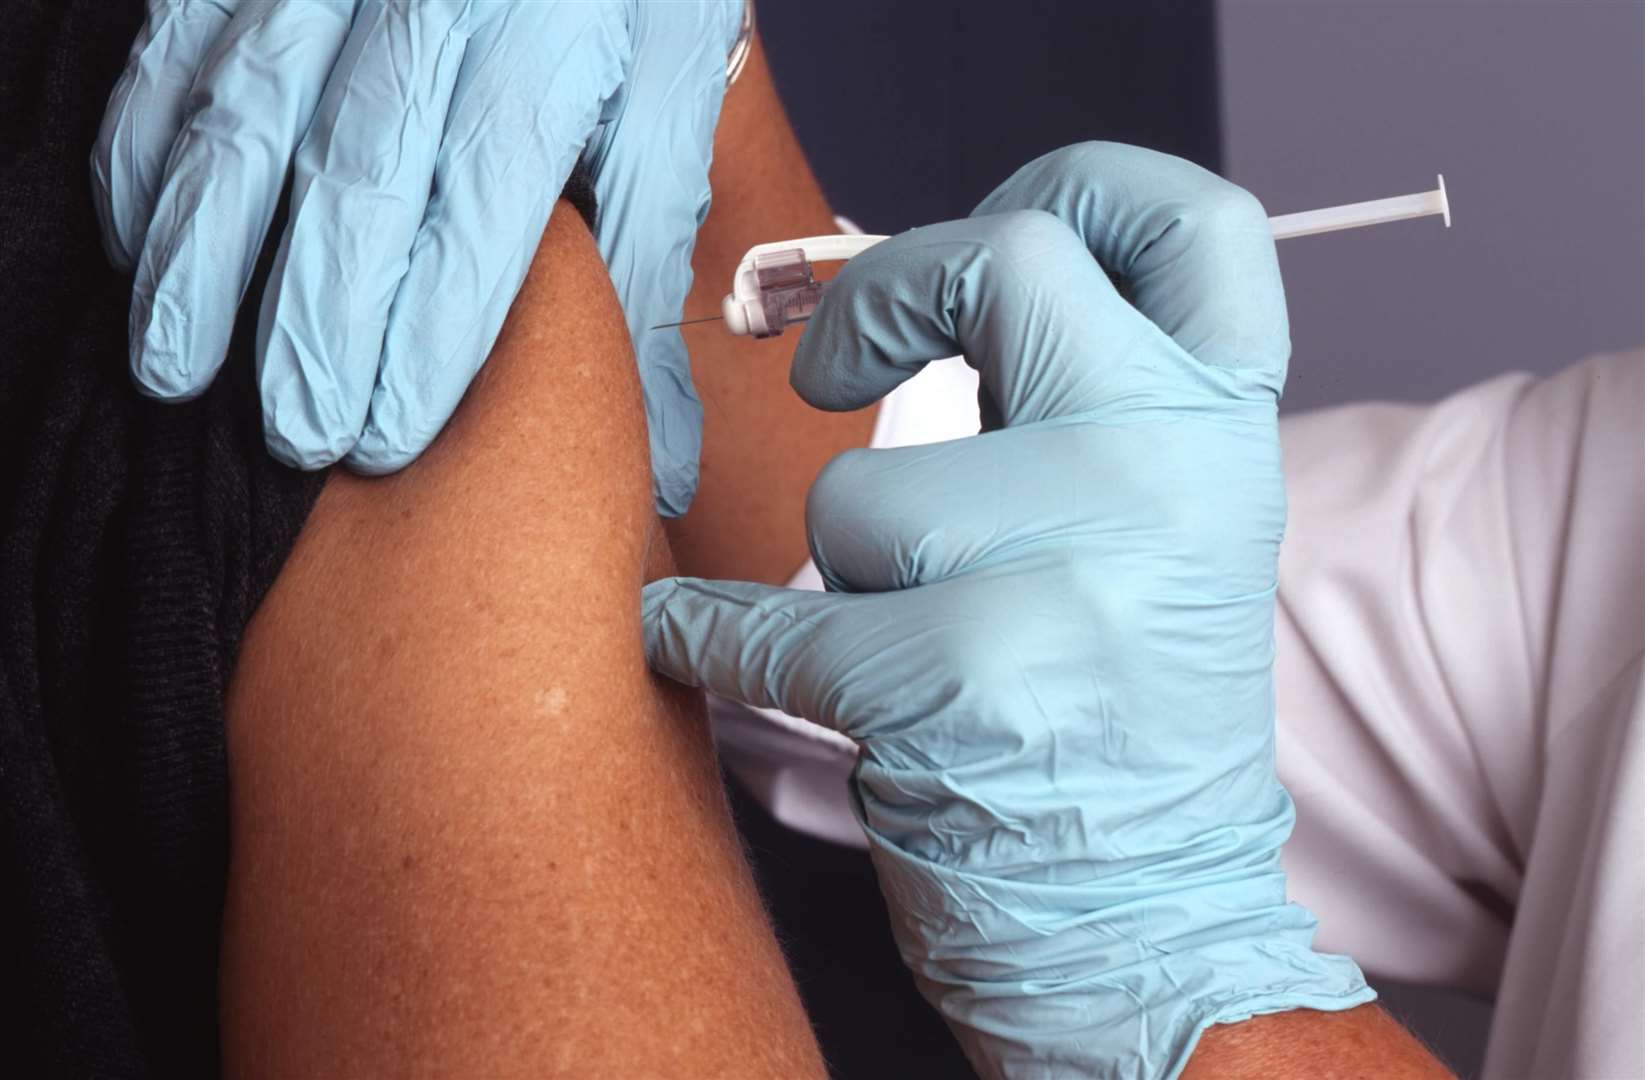 The vaccine roll-out continued - with booster jabs throughout the year